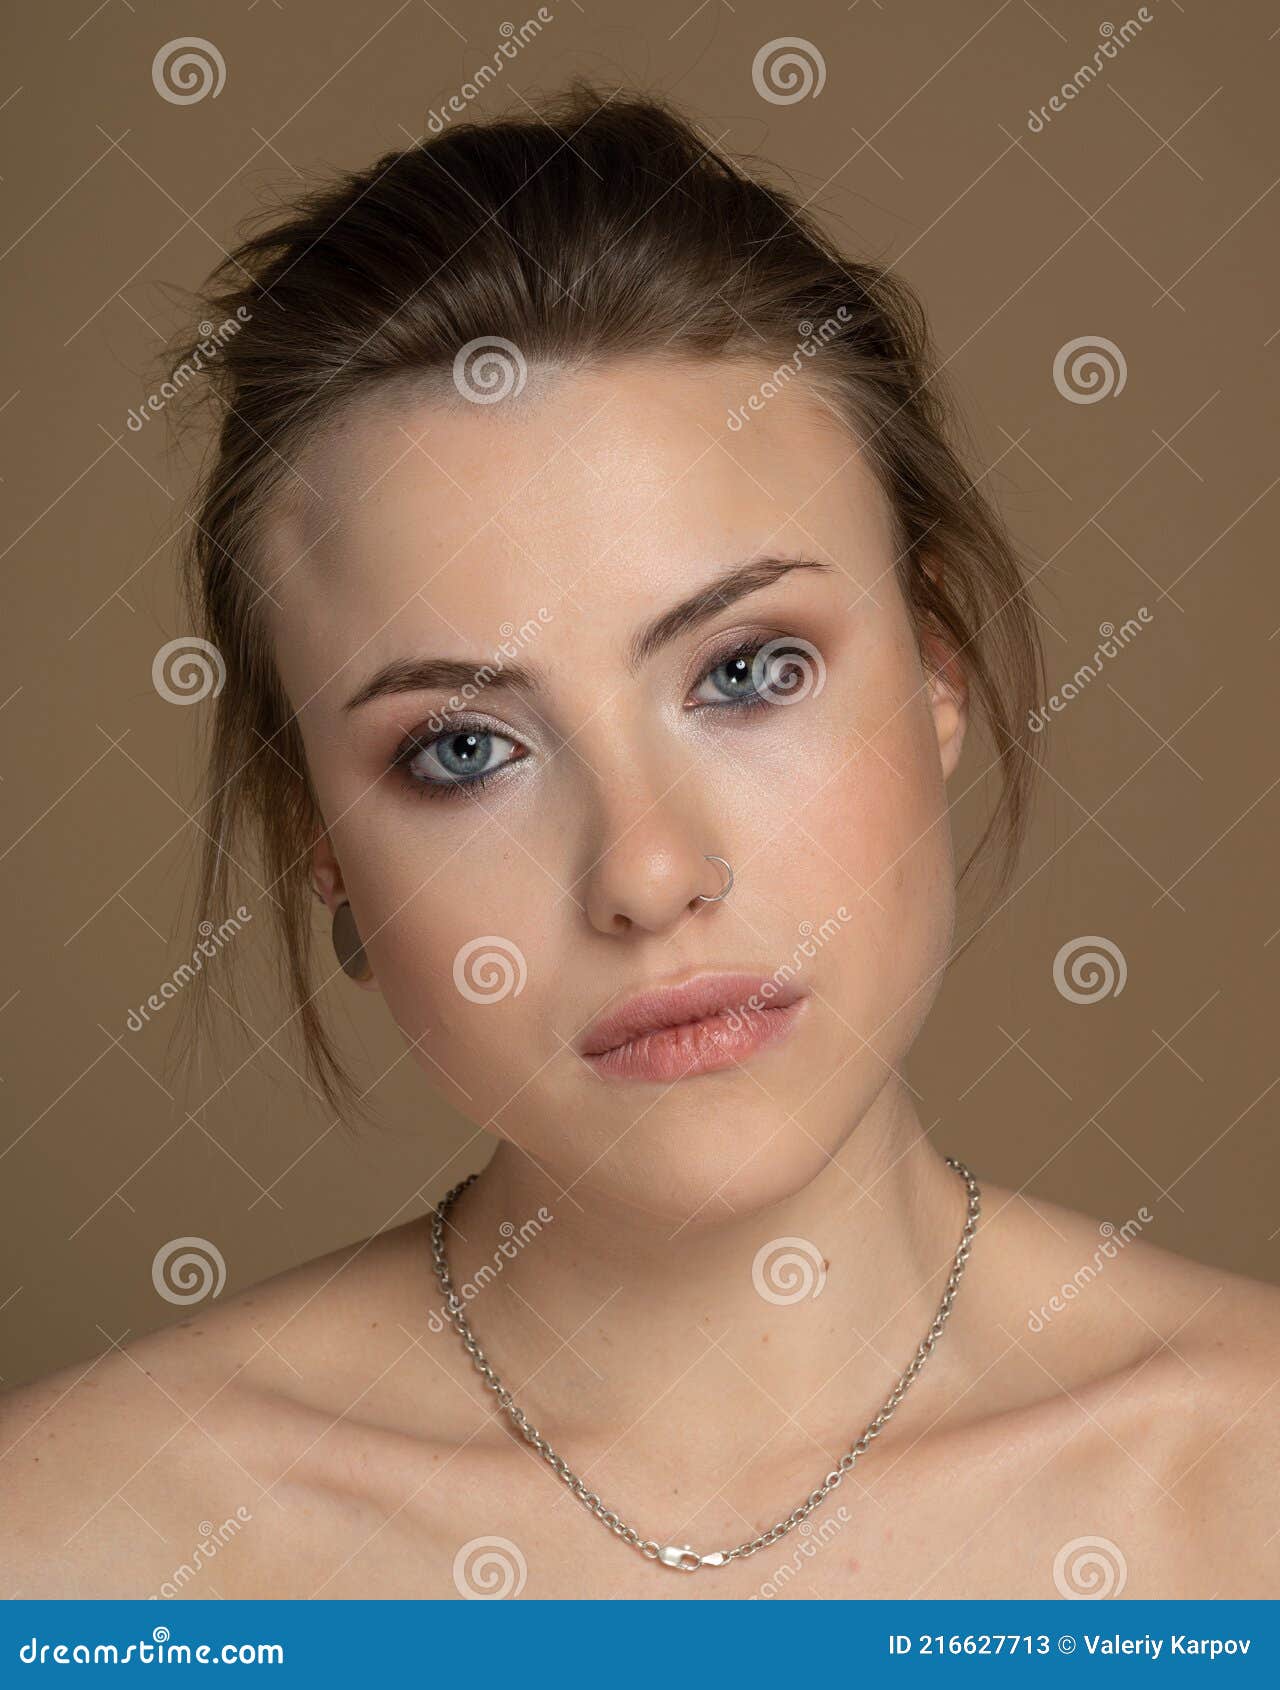 Girl With Heterochromia Looks Into The Camera Stock Image Image Of Beauty Cosmetic 216627713 